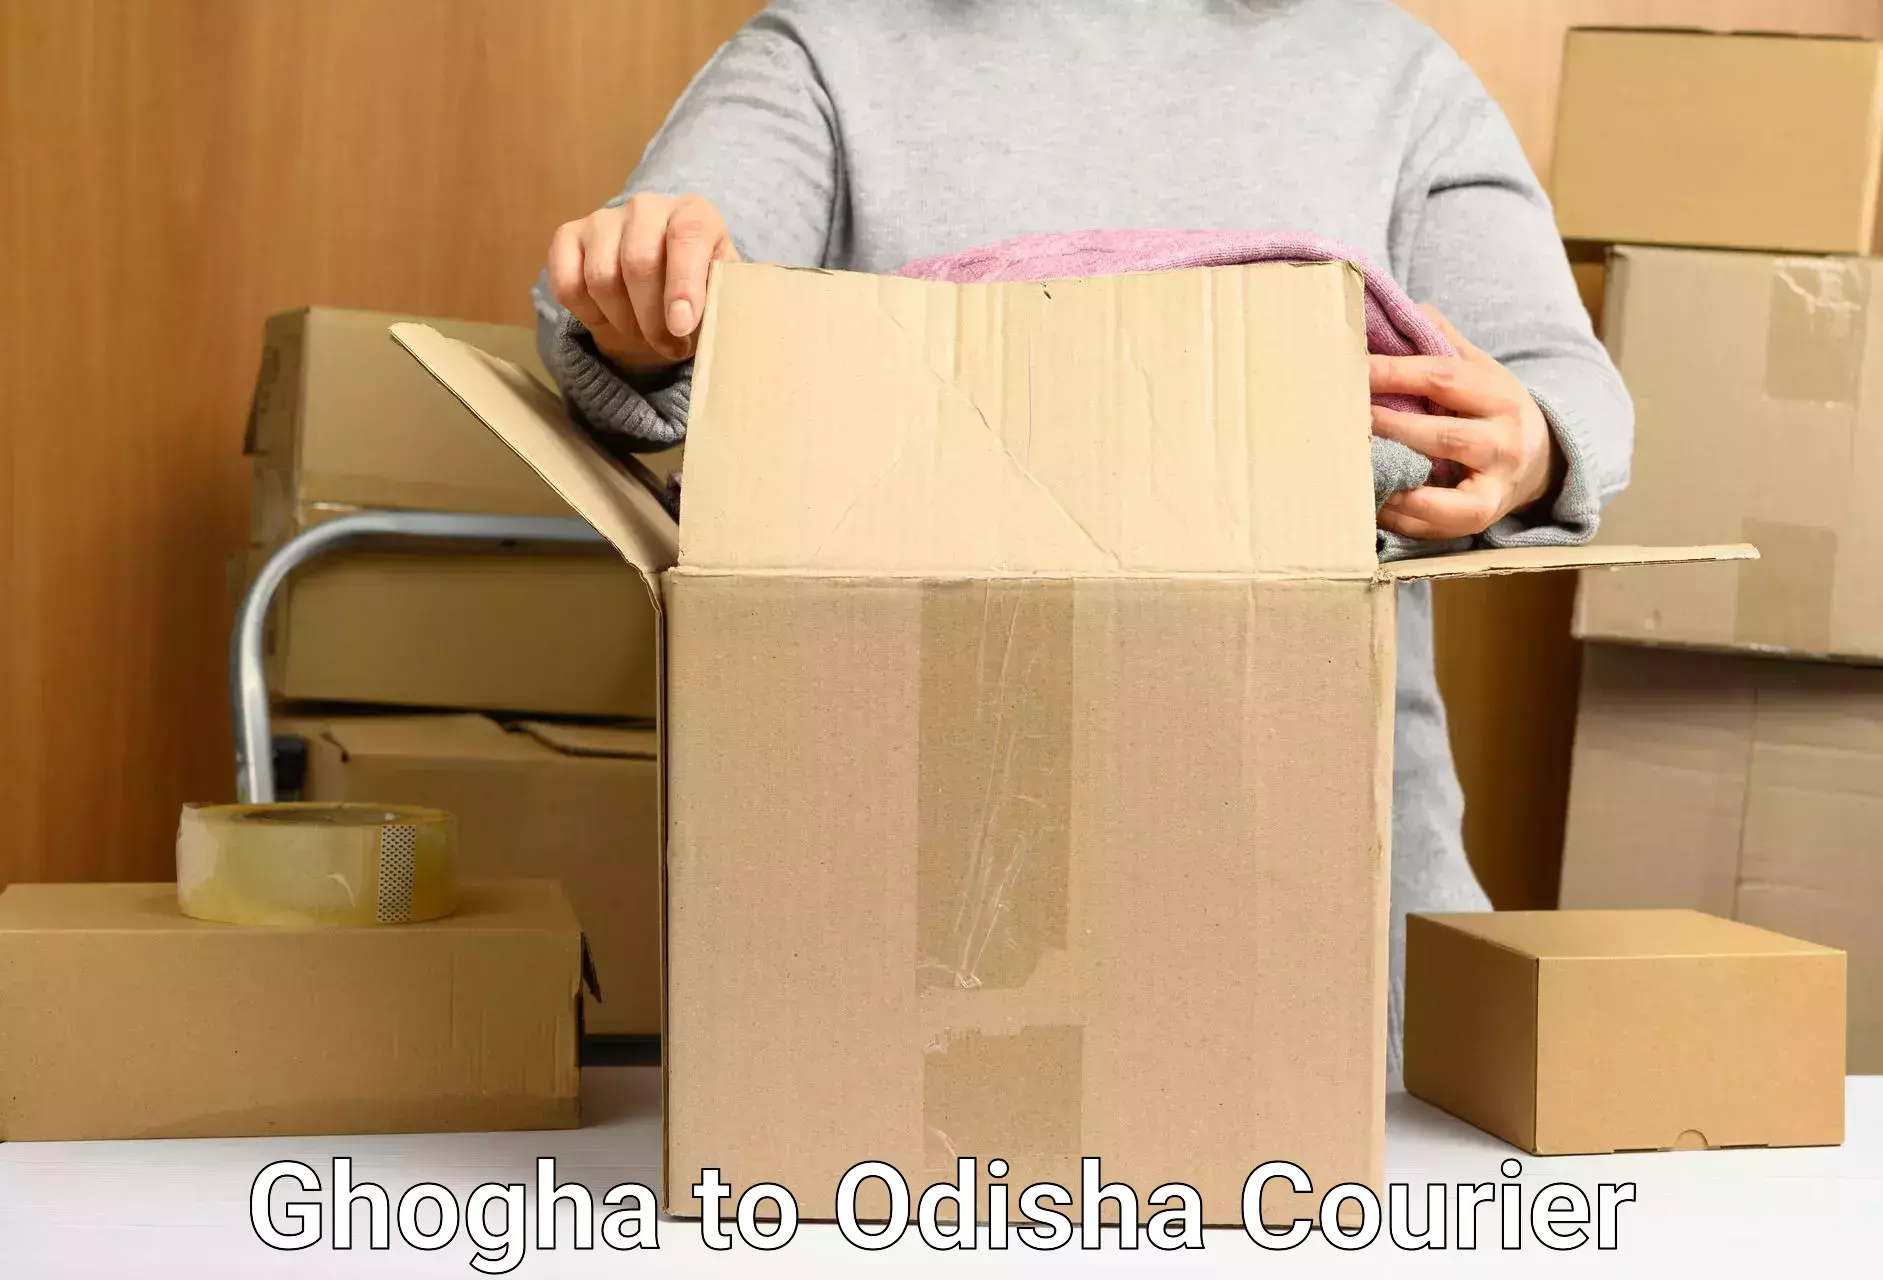 24/7 courier service in Ghogha to Odisha